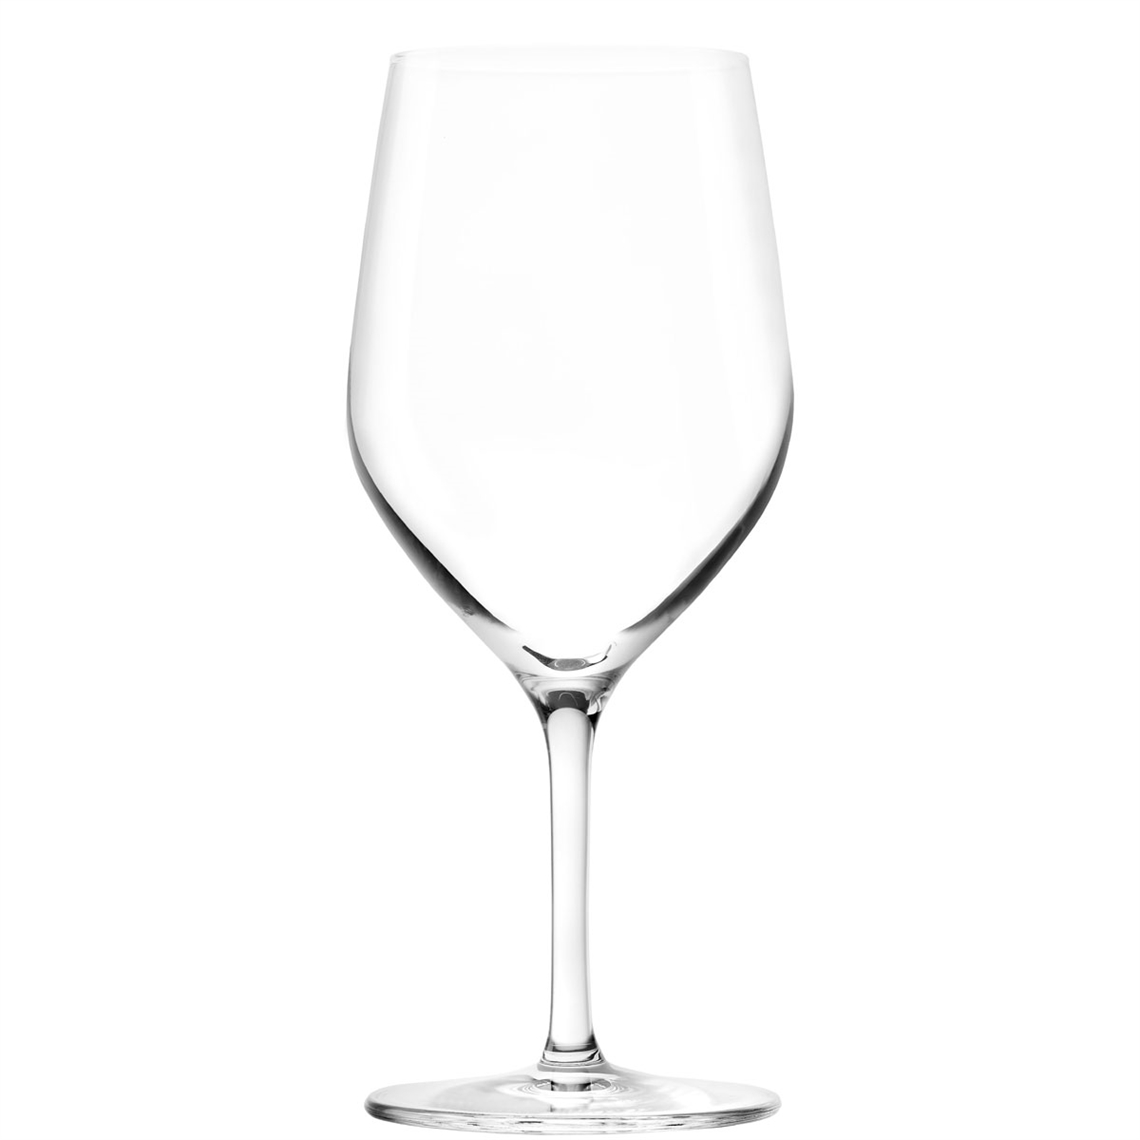 Stolzle Olly Smith Charm Collection White Wine Glass - Set of 4